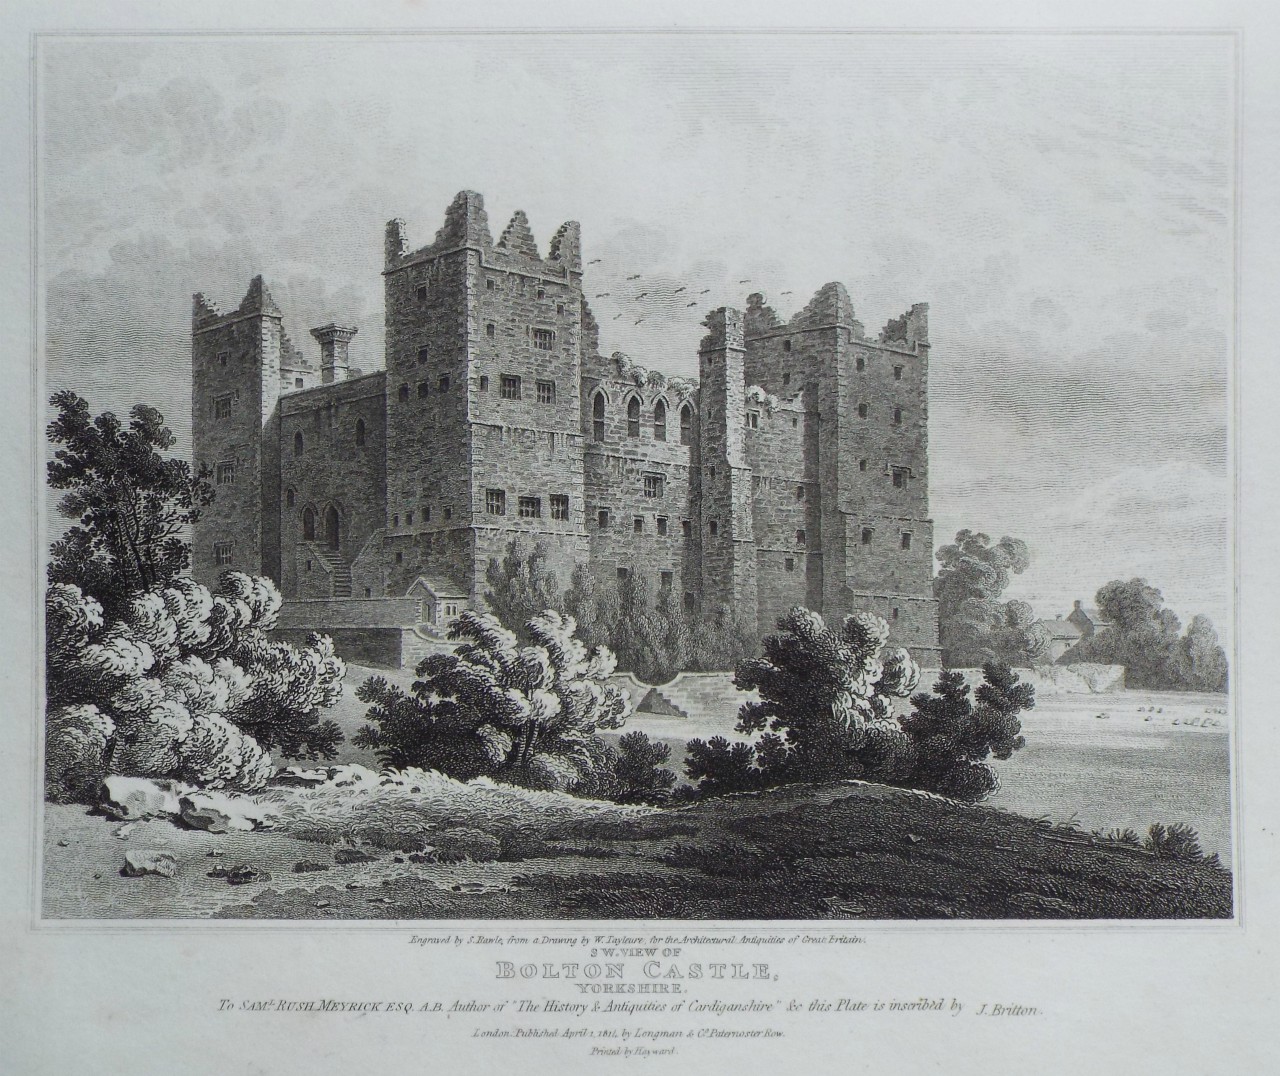 Print - S. W. View of Bolton Castle, Yorkshire. - Rawle